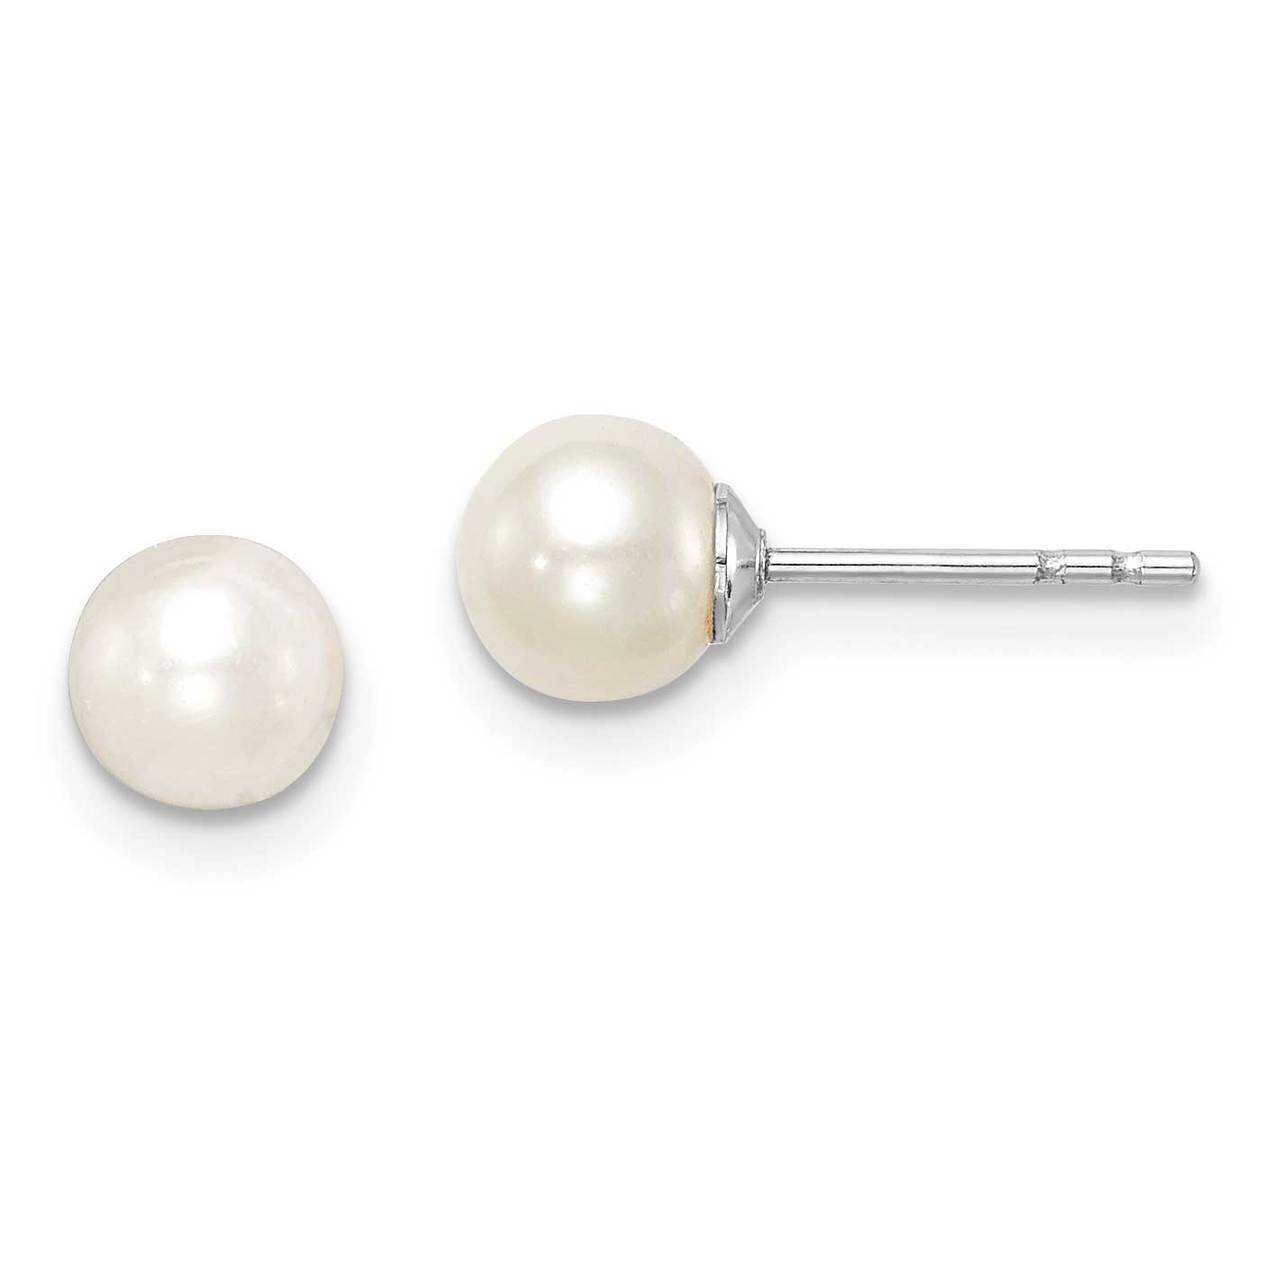 5-6mm White Round Freshwater Cultured Pearl Stud Earrings Sterling Silver Rhodium Plated QE15362